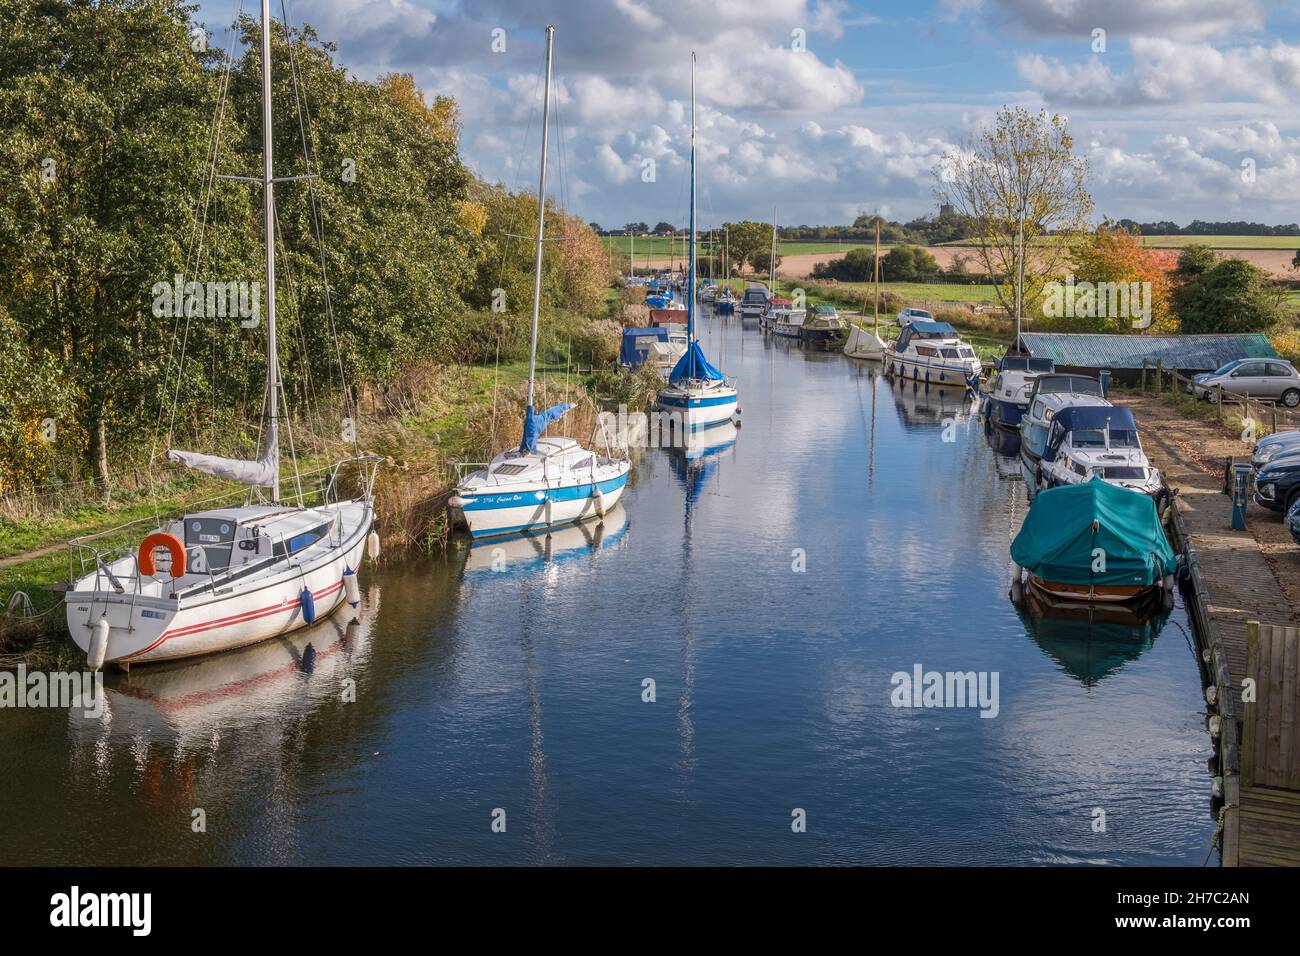 Boats moored on Martham Staithe, a dyke off The River Thurne at Martham, Norfolk Broads, Norfolk, England. Stock Photo